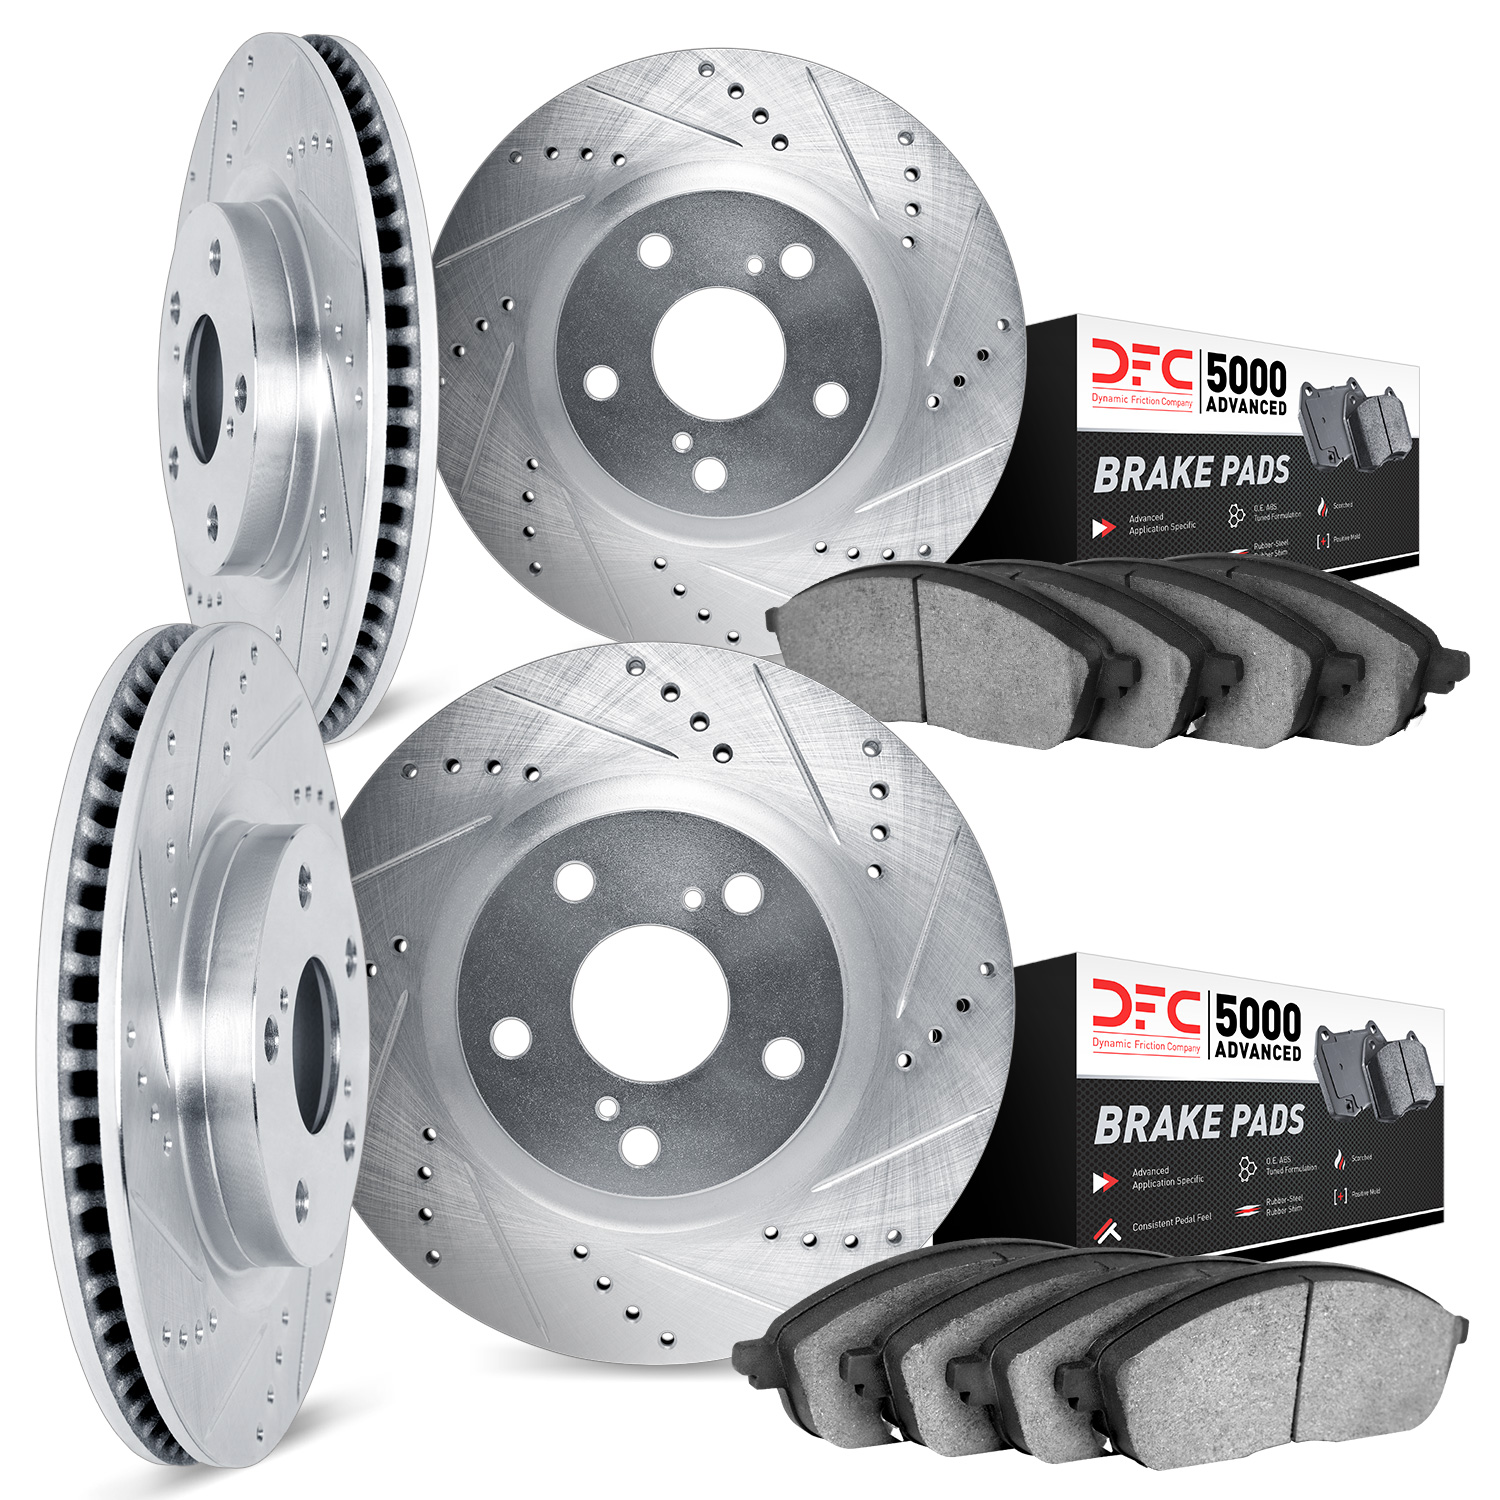 7504-76155 Drilled/Slotted Brake Rotors w/5000 Advanced Brake Pads Kit [Silver], 1991-1997 Lexus/Toyota/Scion, Position: Front a